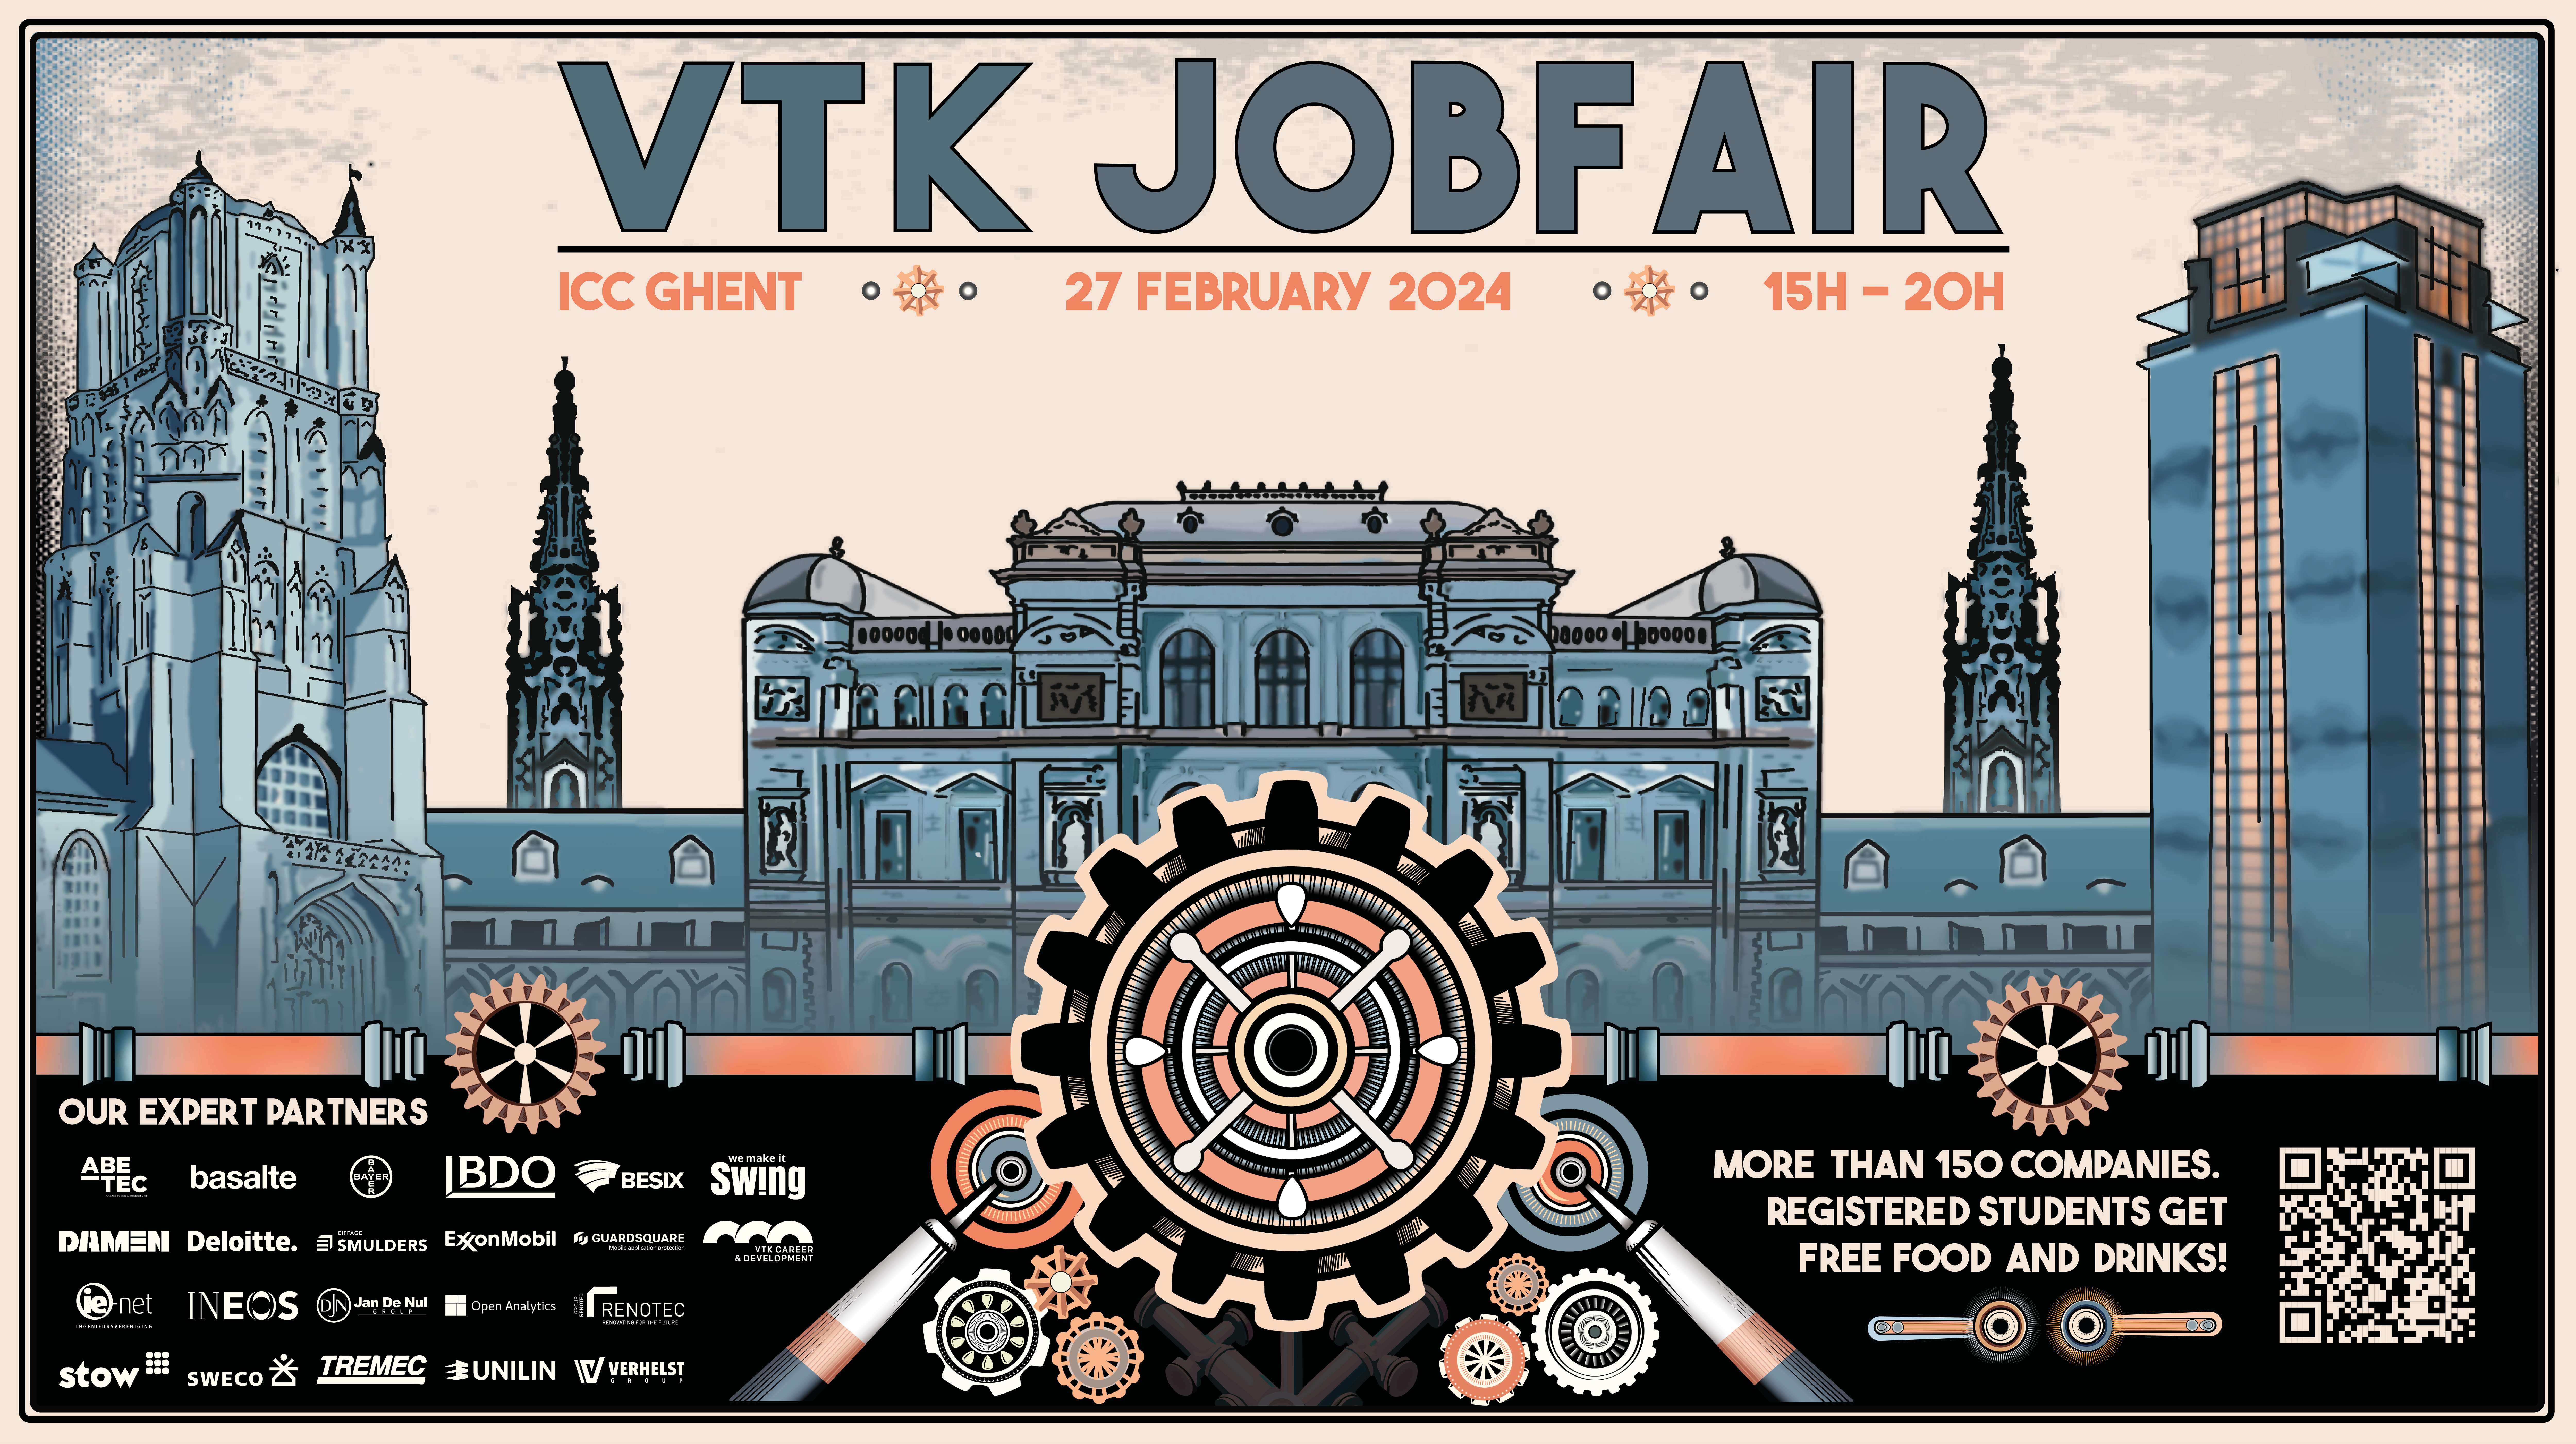 Subscribe for the VTK Jobfair